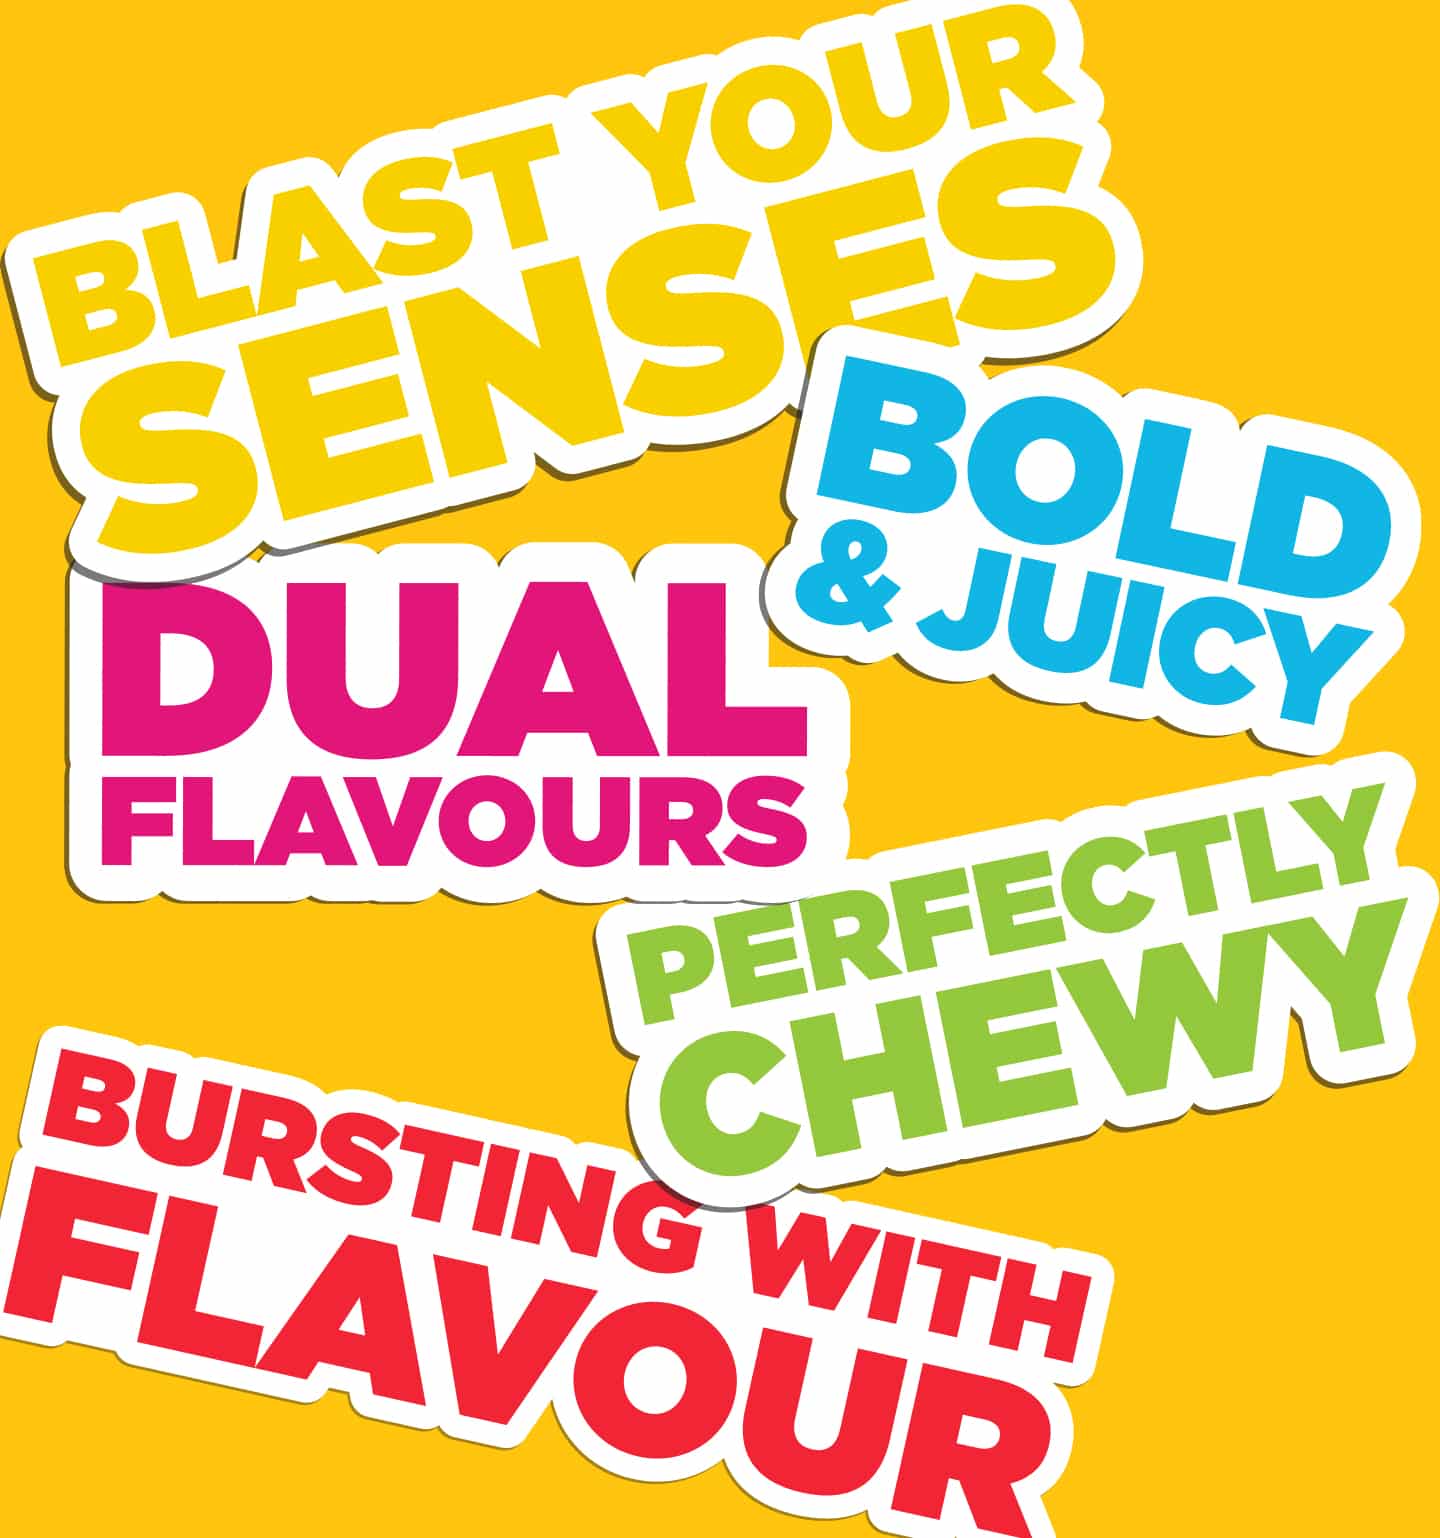 Bold & Juicy, Dual Flavours, Perfectly Chewy